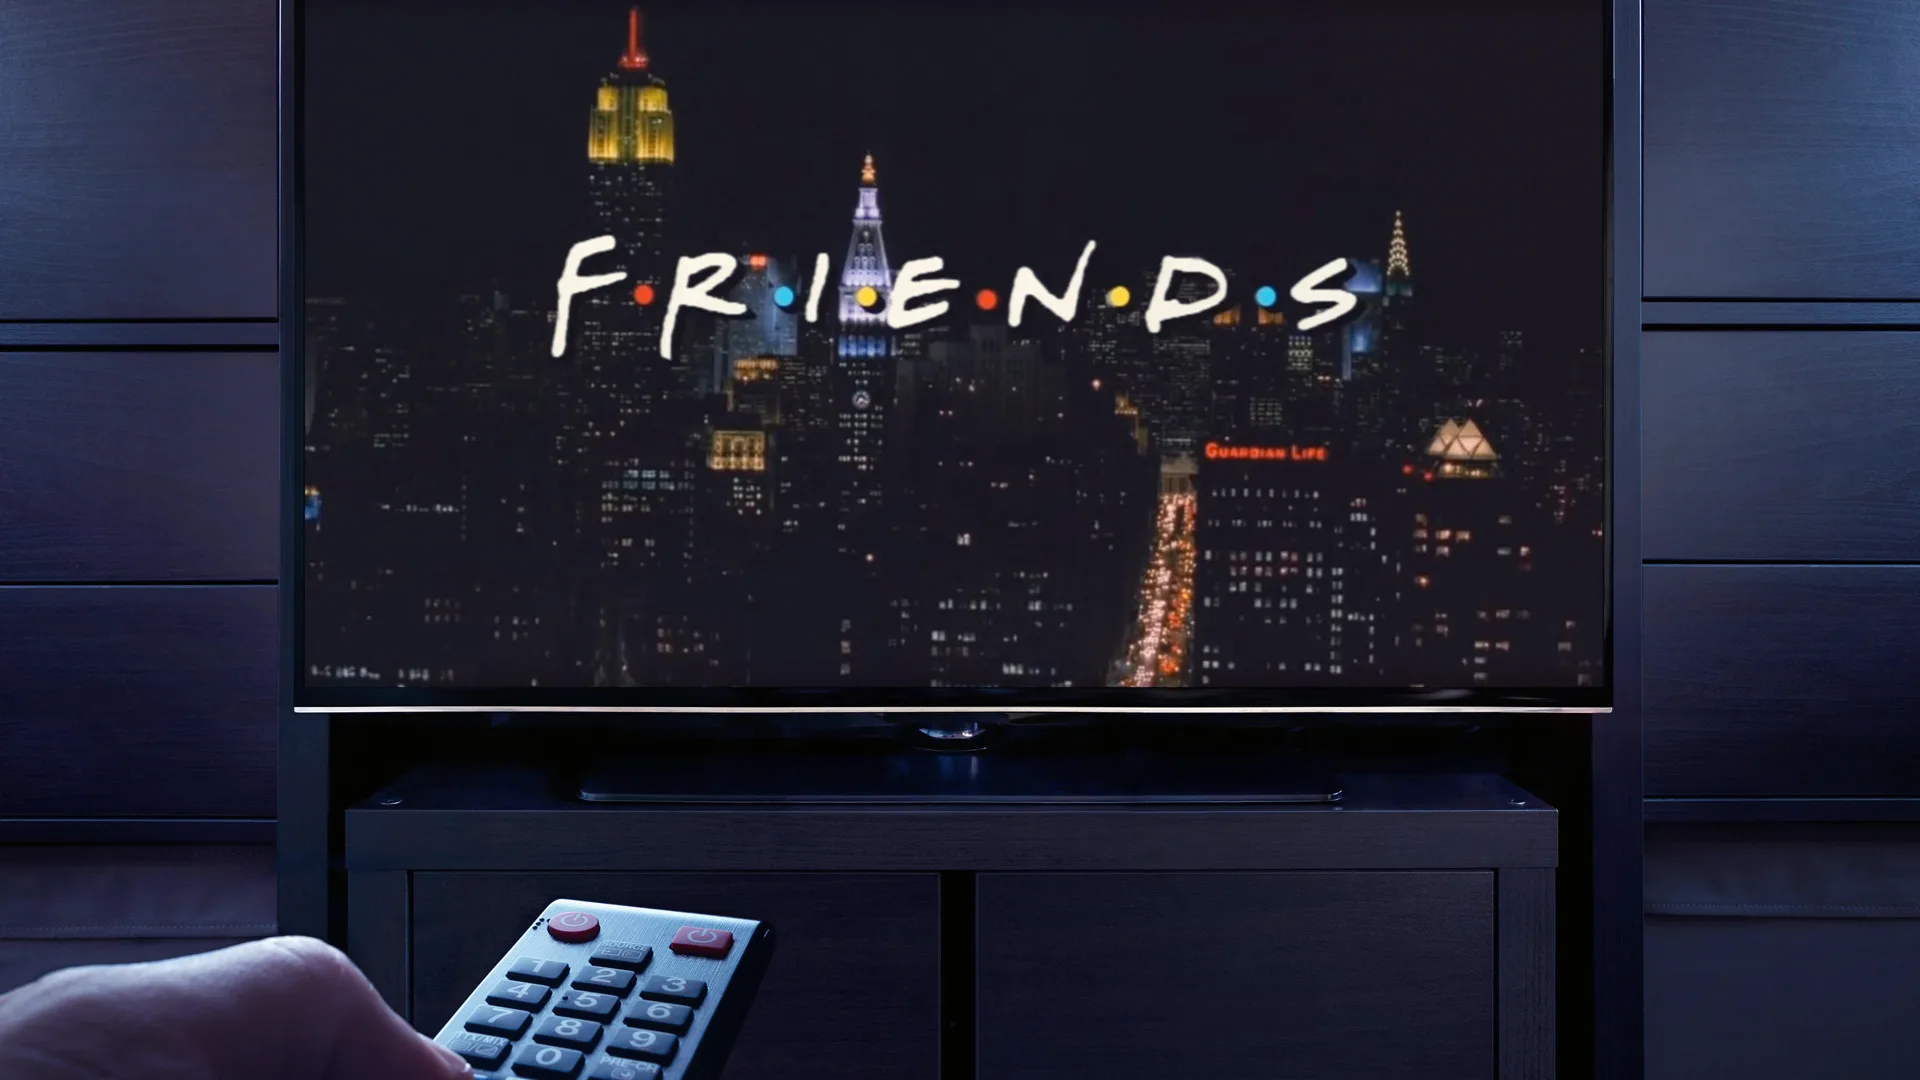 A photograph of a TV screen showing the intro of Friends with someone pointing a remote control at the tv in the dark